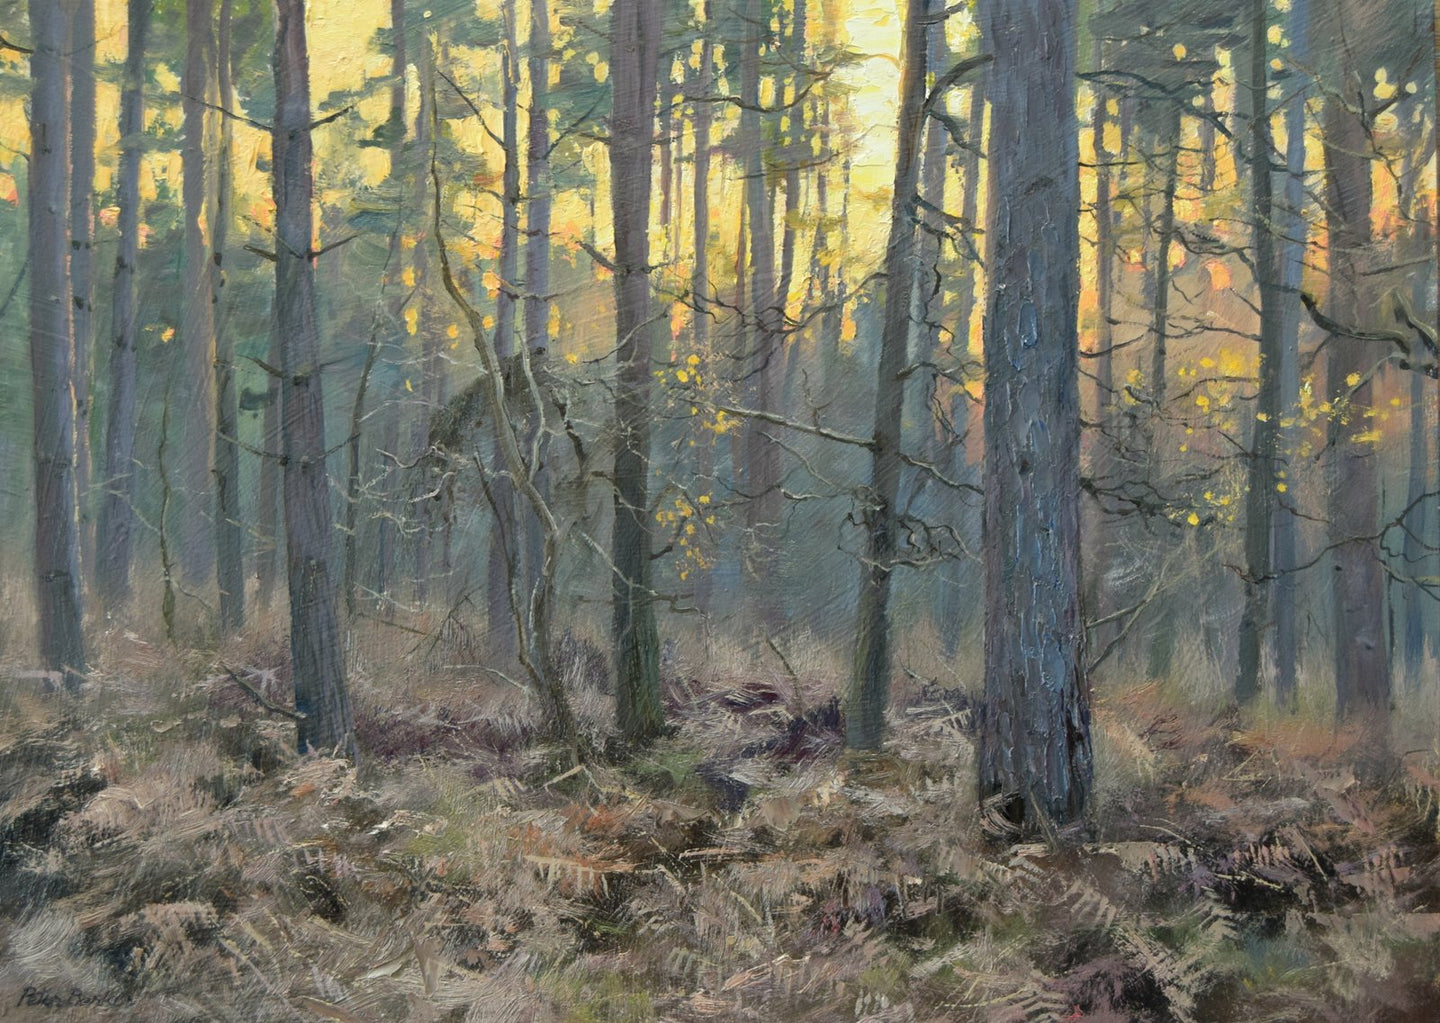 Oil painting of dusk at Wakerley Wood, with a golden sky, pines and lots of dead bracken on the woodland floor